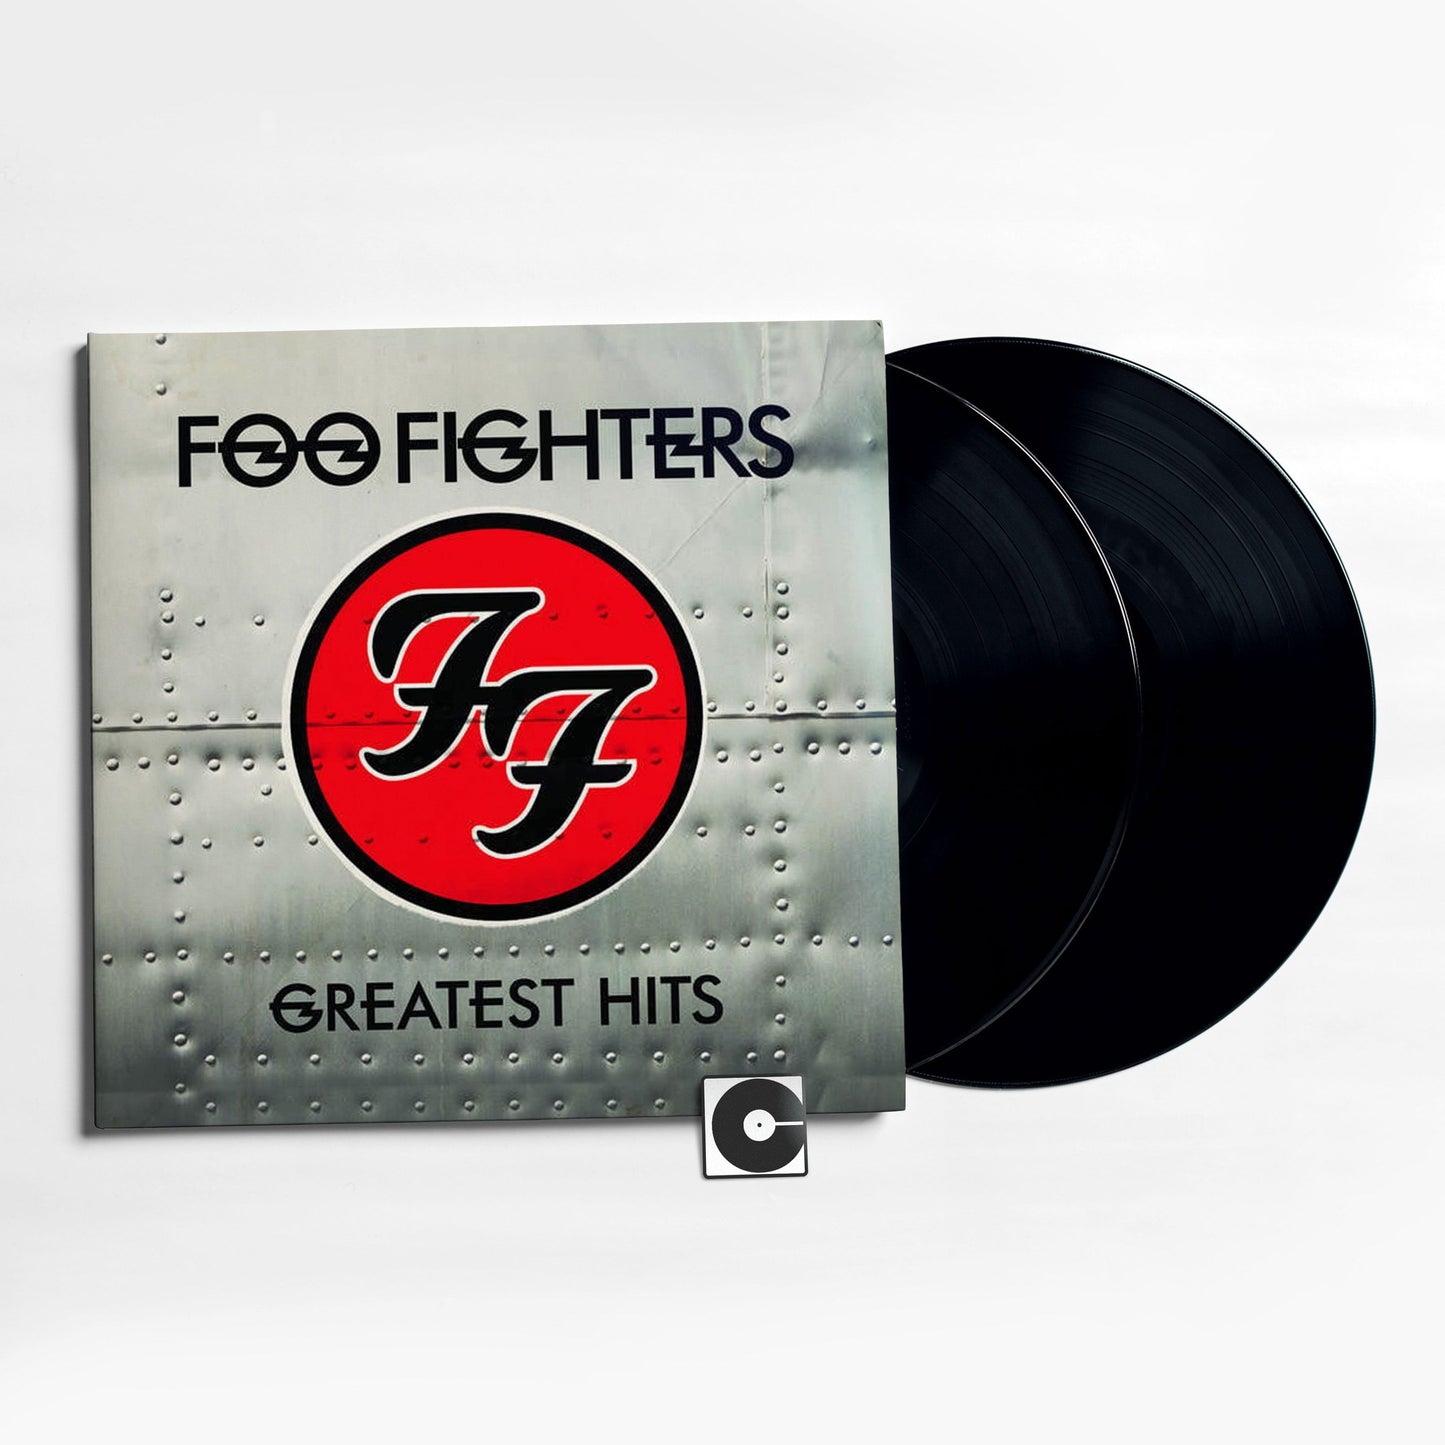 Foo Fighters - "Greatest Hits"